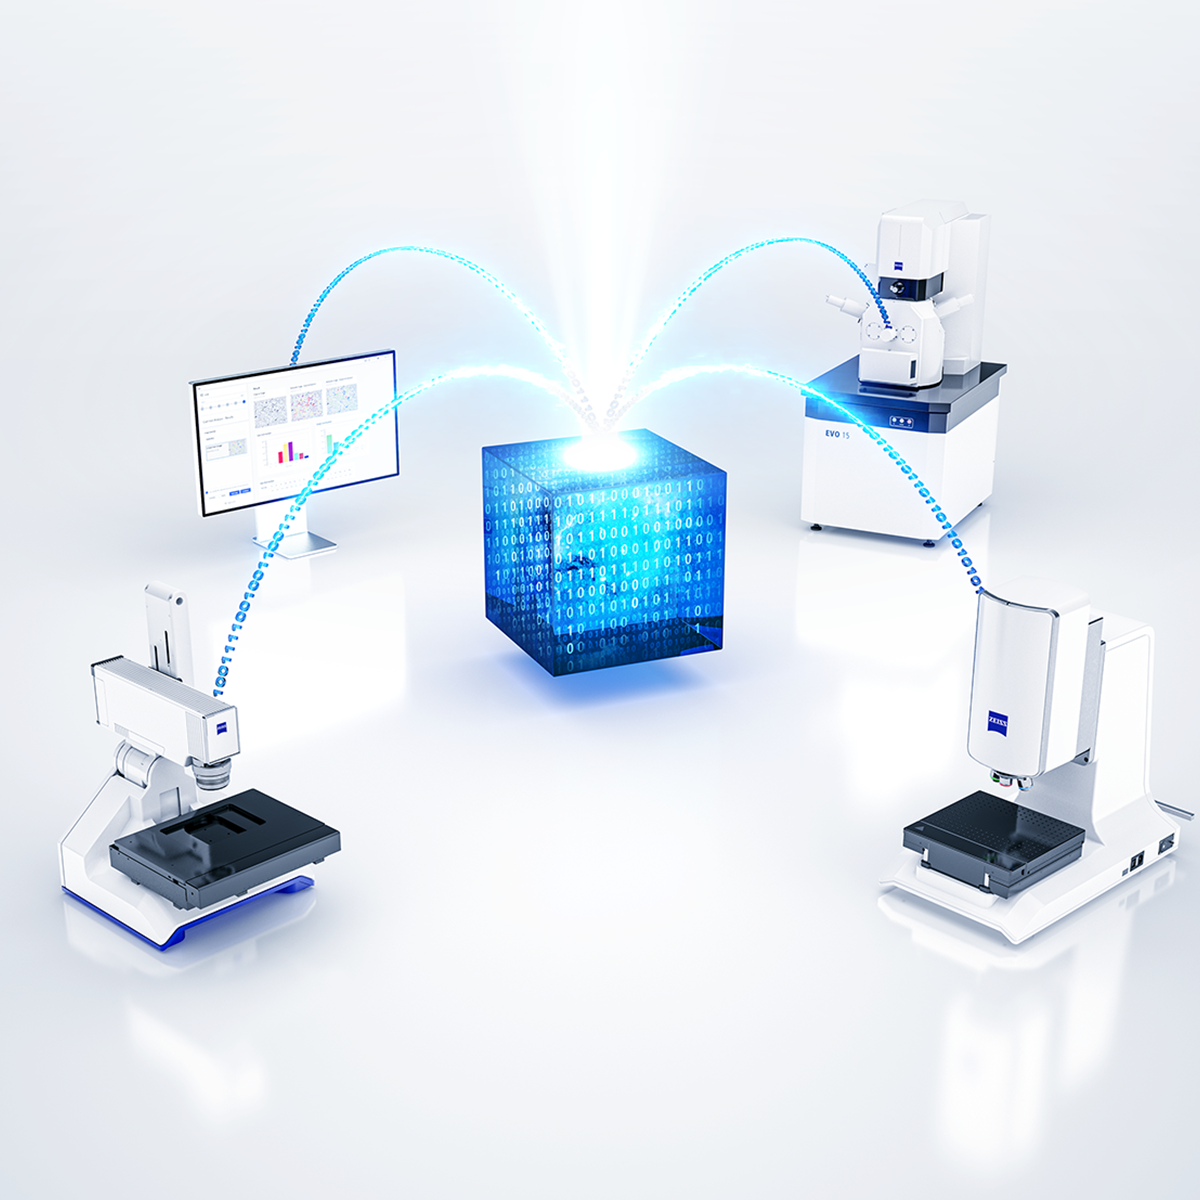 Infrastructure Solutions for the Connected Laboratory